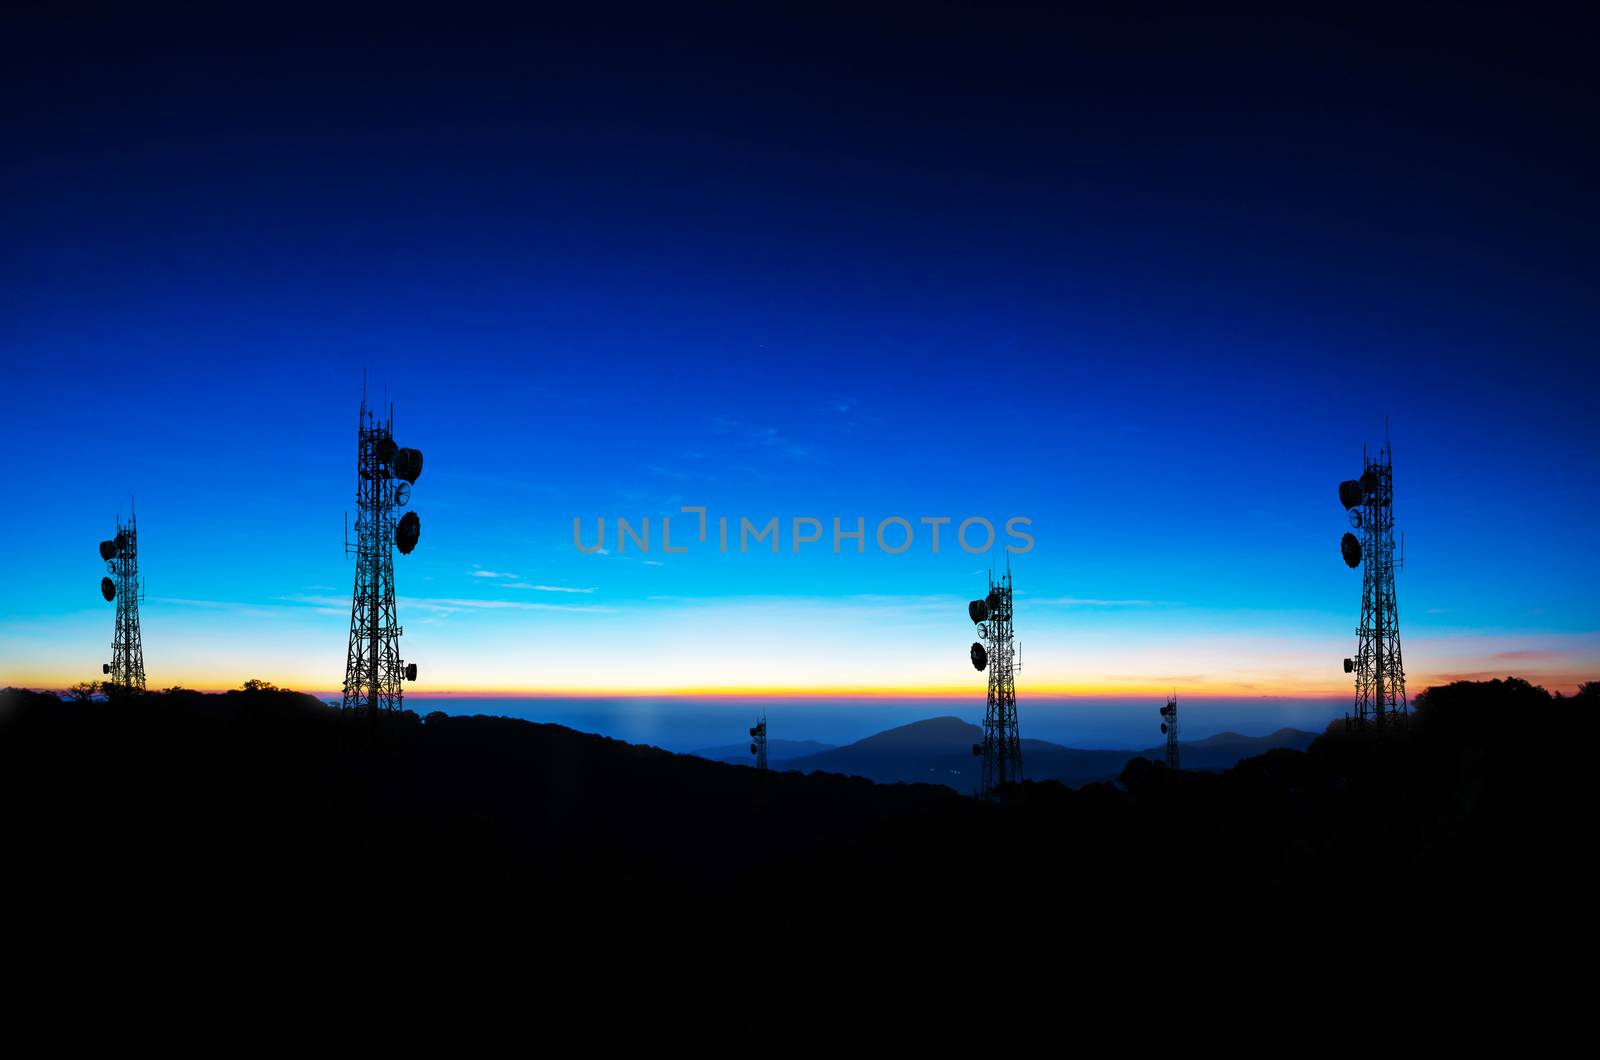 shadow phone antenna on nature background